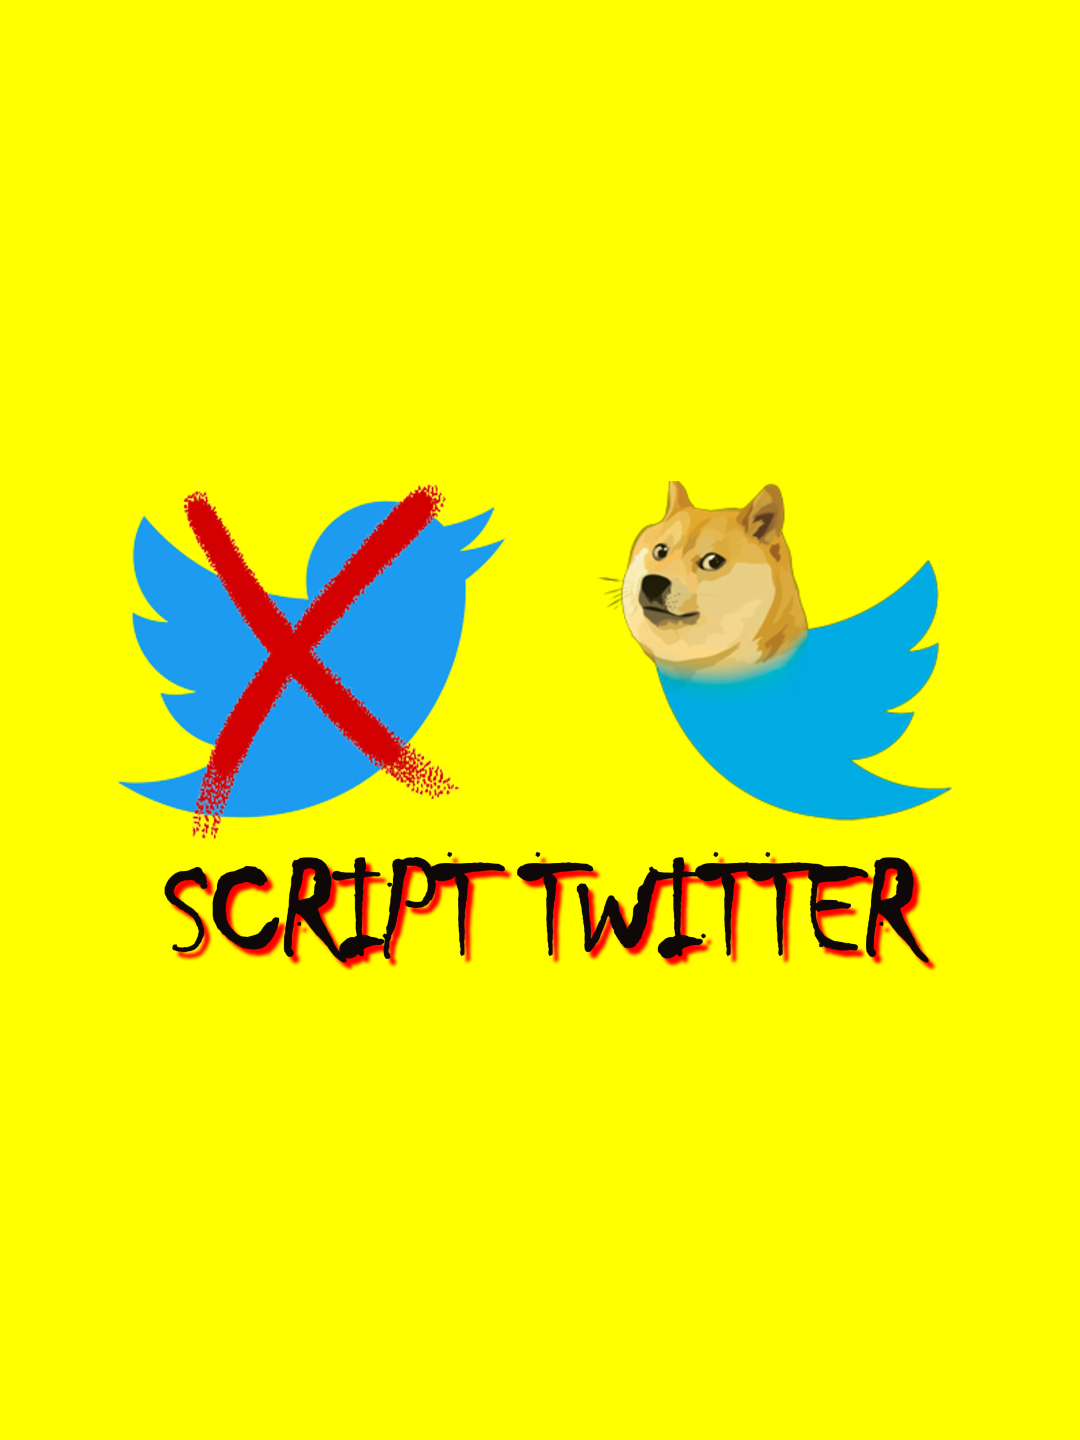 Automatic scripts to remove users you follow on Twitter in bulk